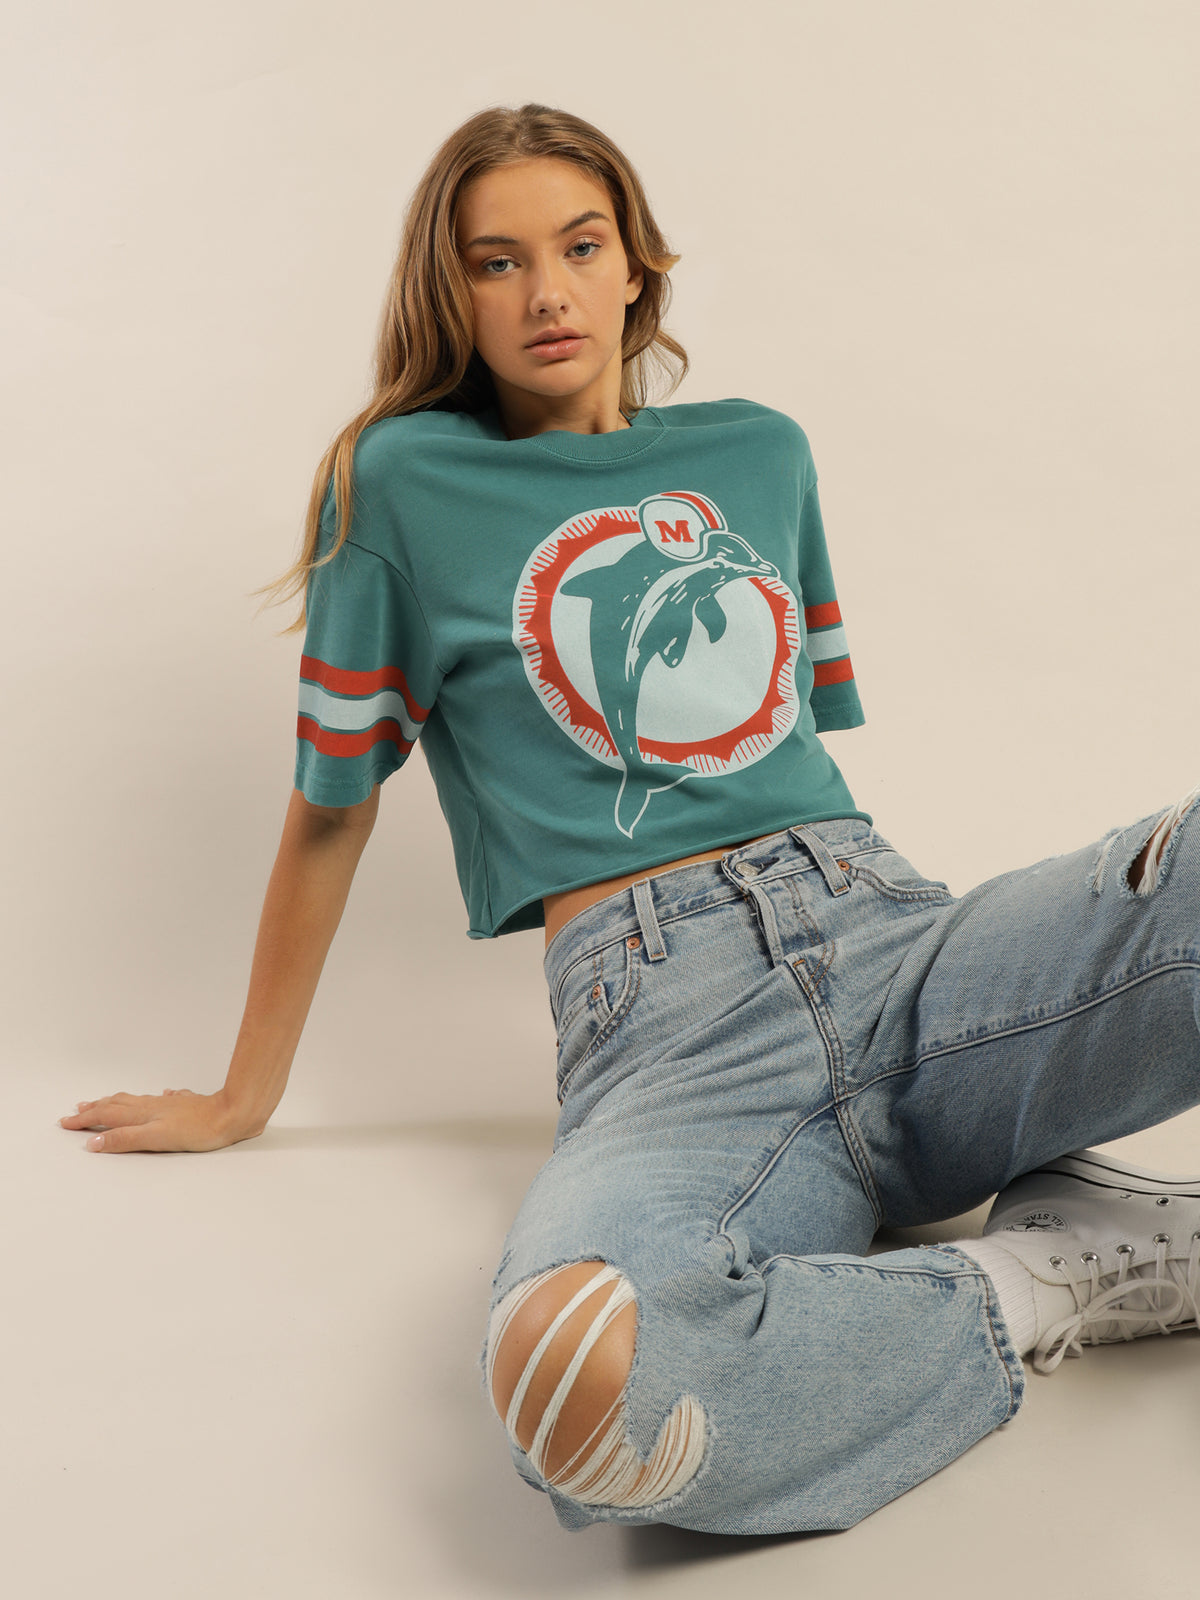 Dolphins Conference T-Shirt in Teal